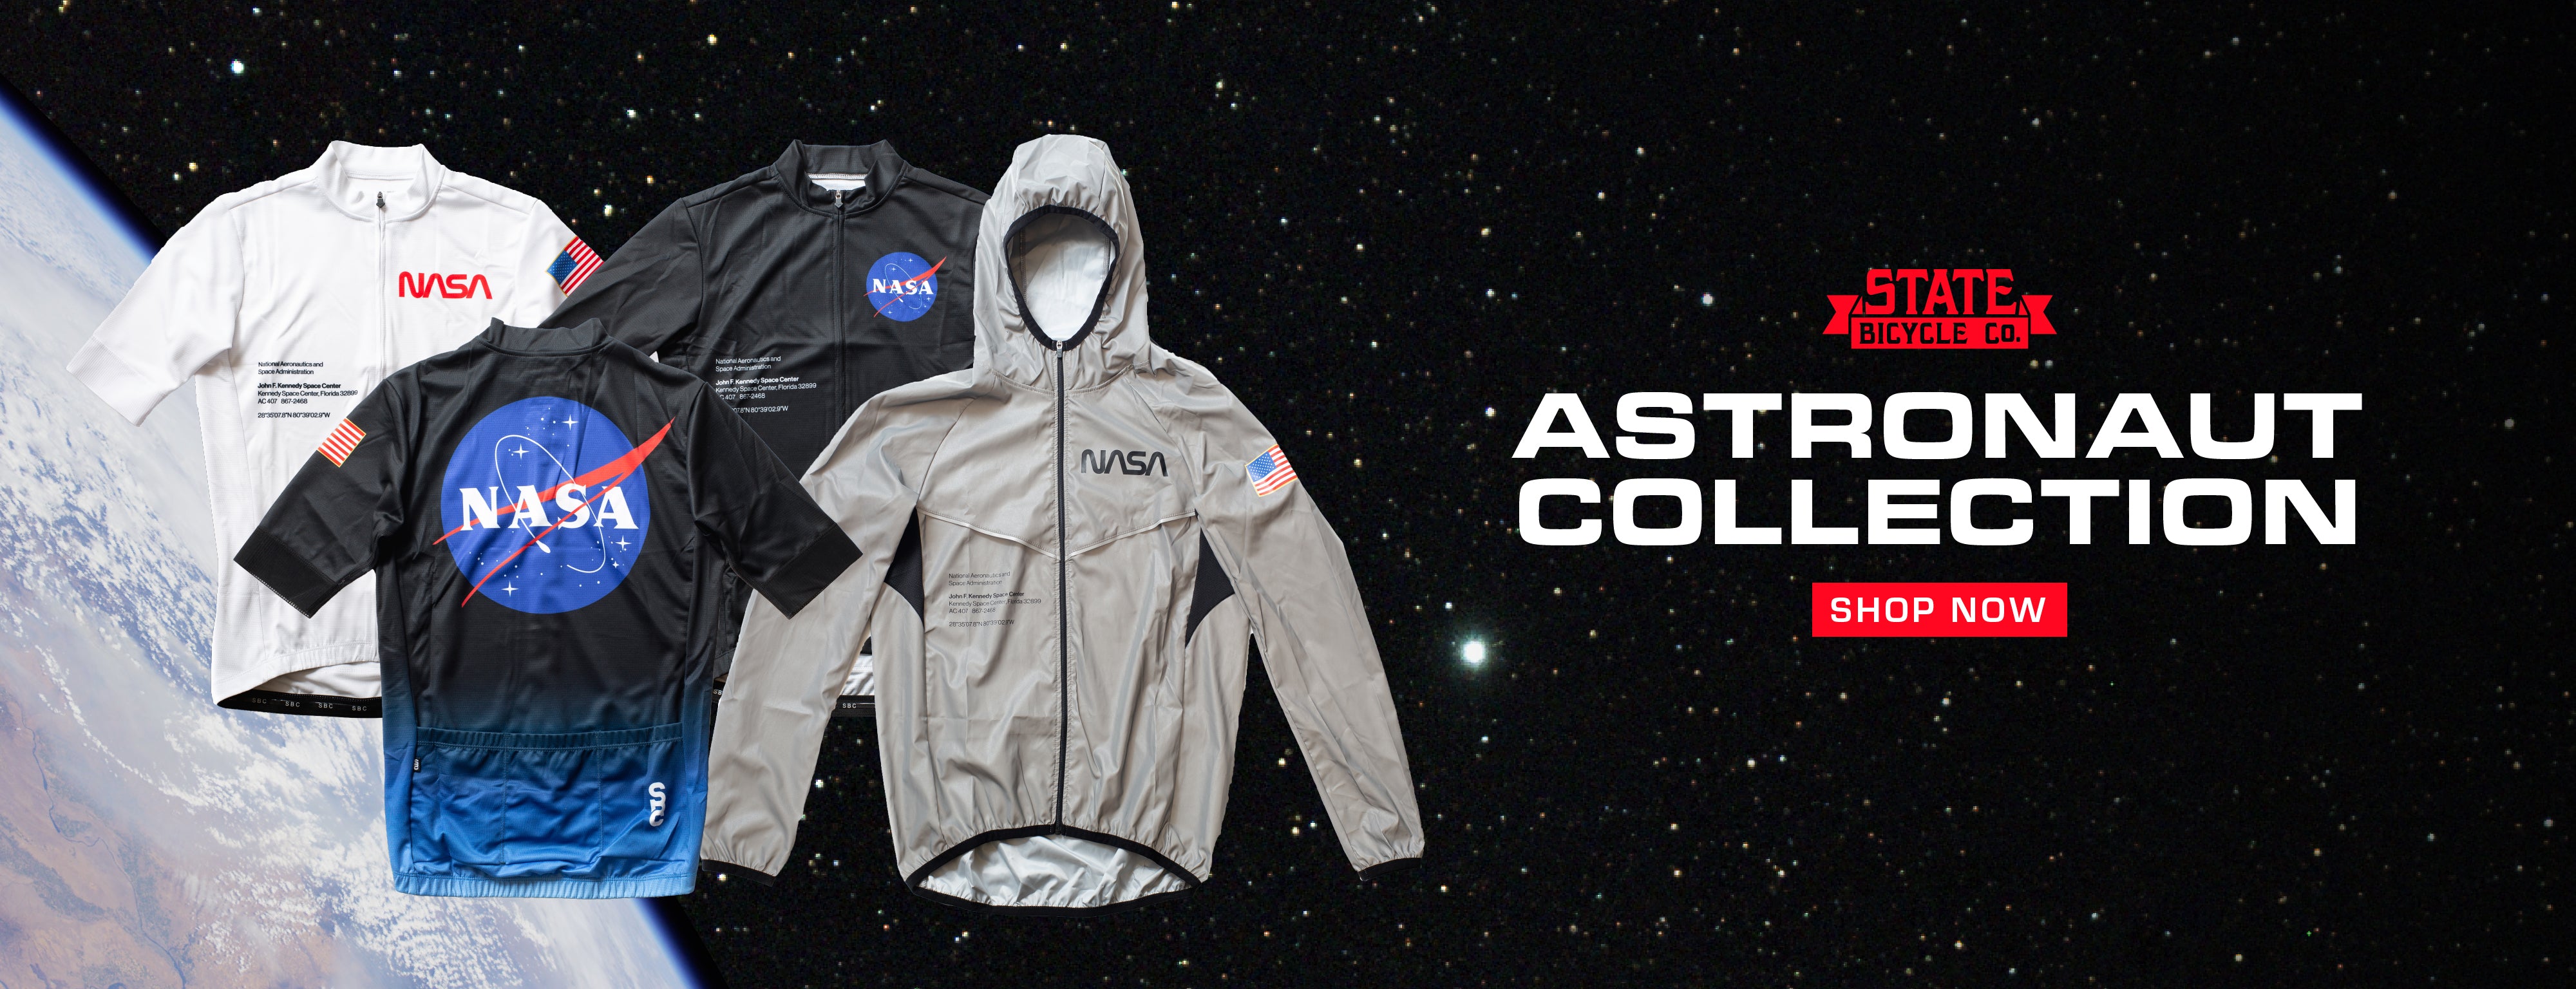 First Look 👀 : State Bicycle Co. Astronaut Collection & 